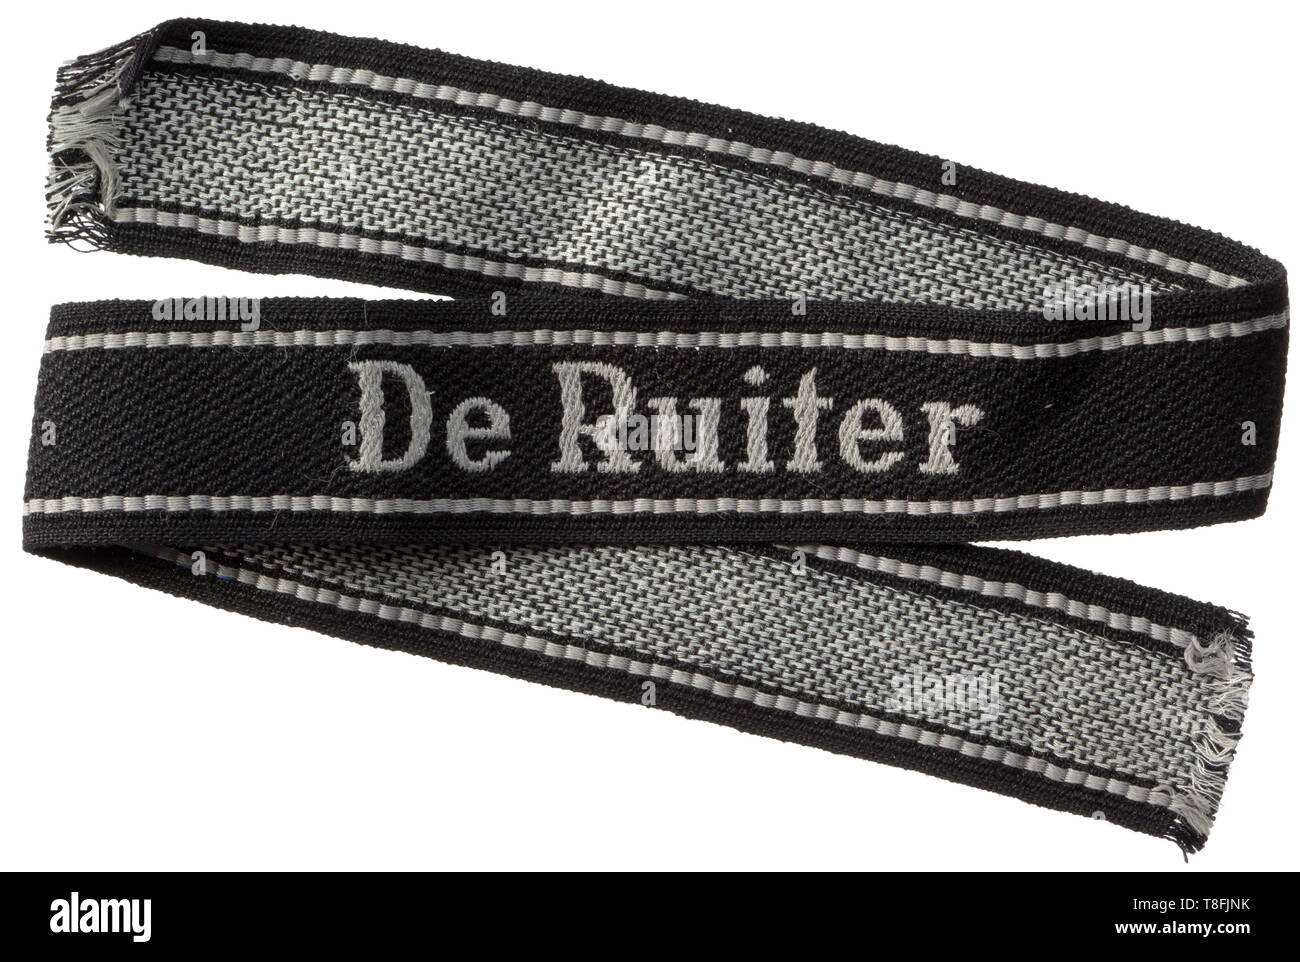 A cuff title 'De Ruiter' 'BeVo-like' machine-woven issue. Length 48 cm. historic, historical, 20th century, 1930s, 1940s, Waffen-SS, armed division of the SS, armed service, armed services, NS, National Socialism, Nazism, Third Reich, German Reich, Germany, military, militaria, utensil, piece of equipment, utensils, object, objects, stills, clipping, clippings, cut out, cut-out, cut-outs, fascism, fascistic, National Socialist, Nazi, Nazi period, Editorial-Use-Only Stock Photo